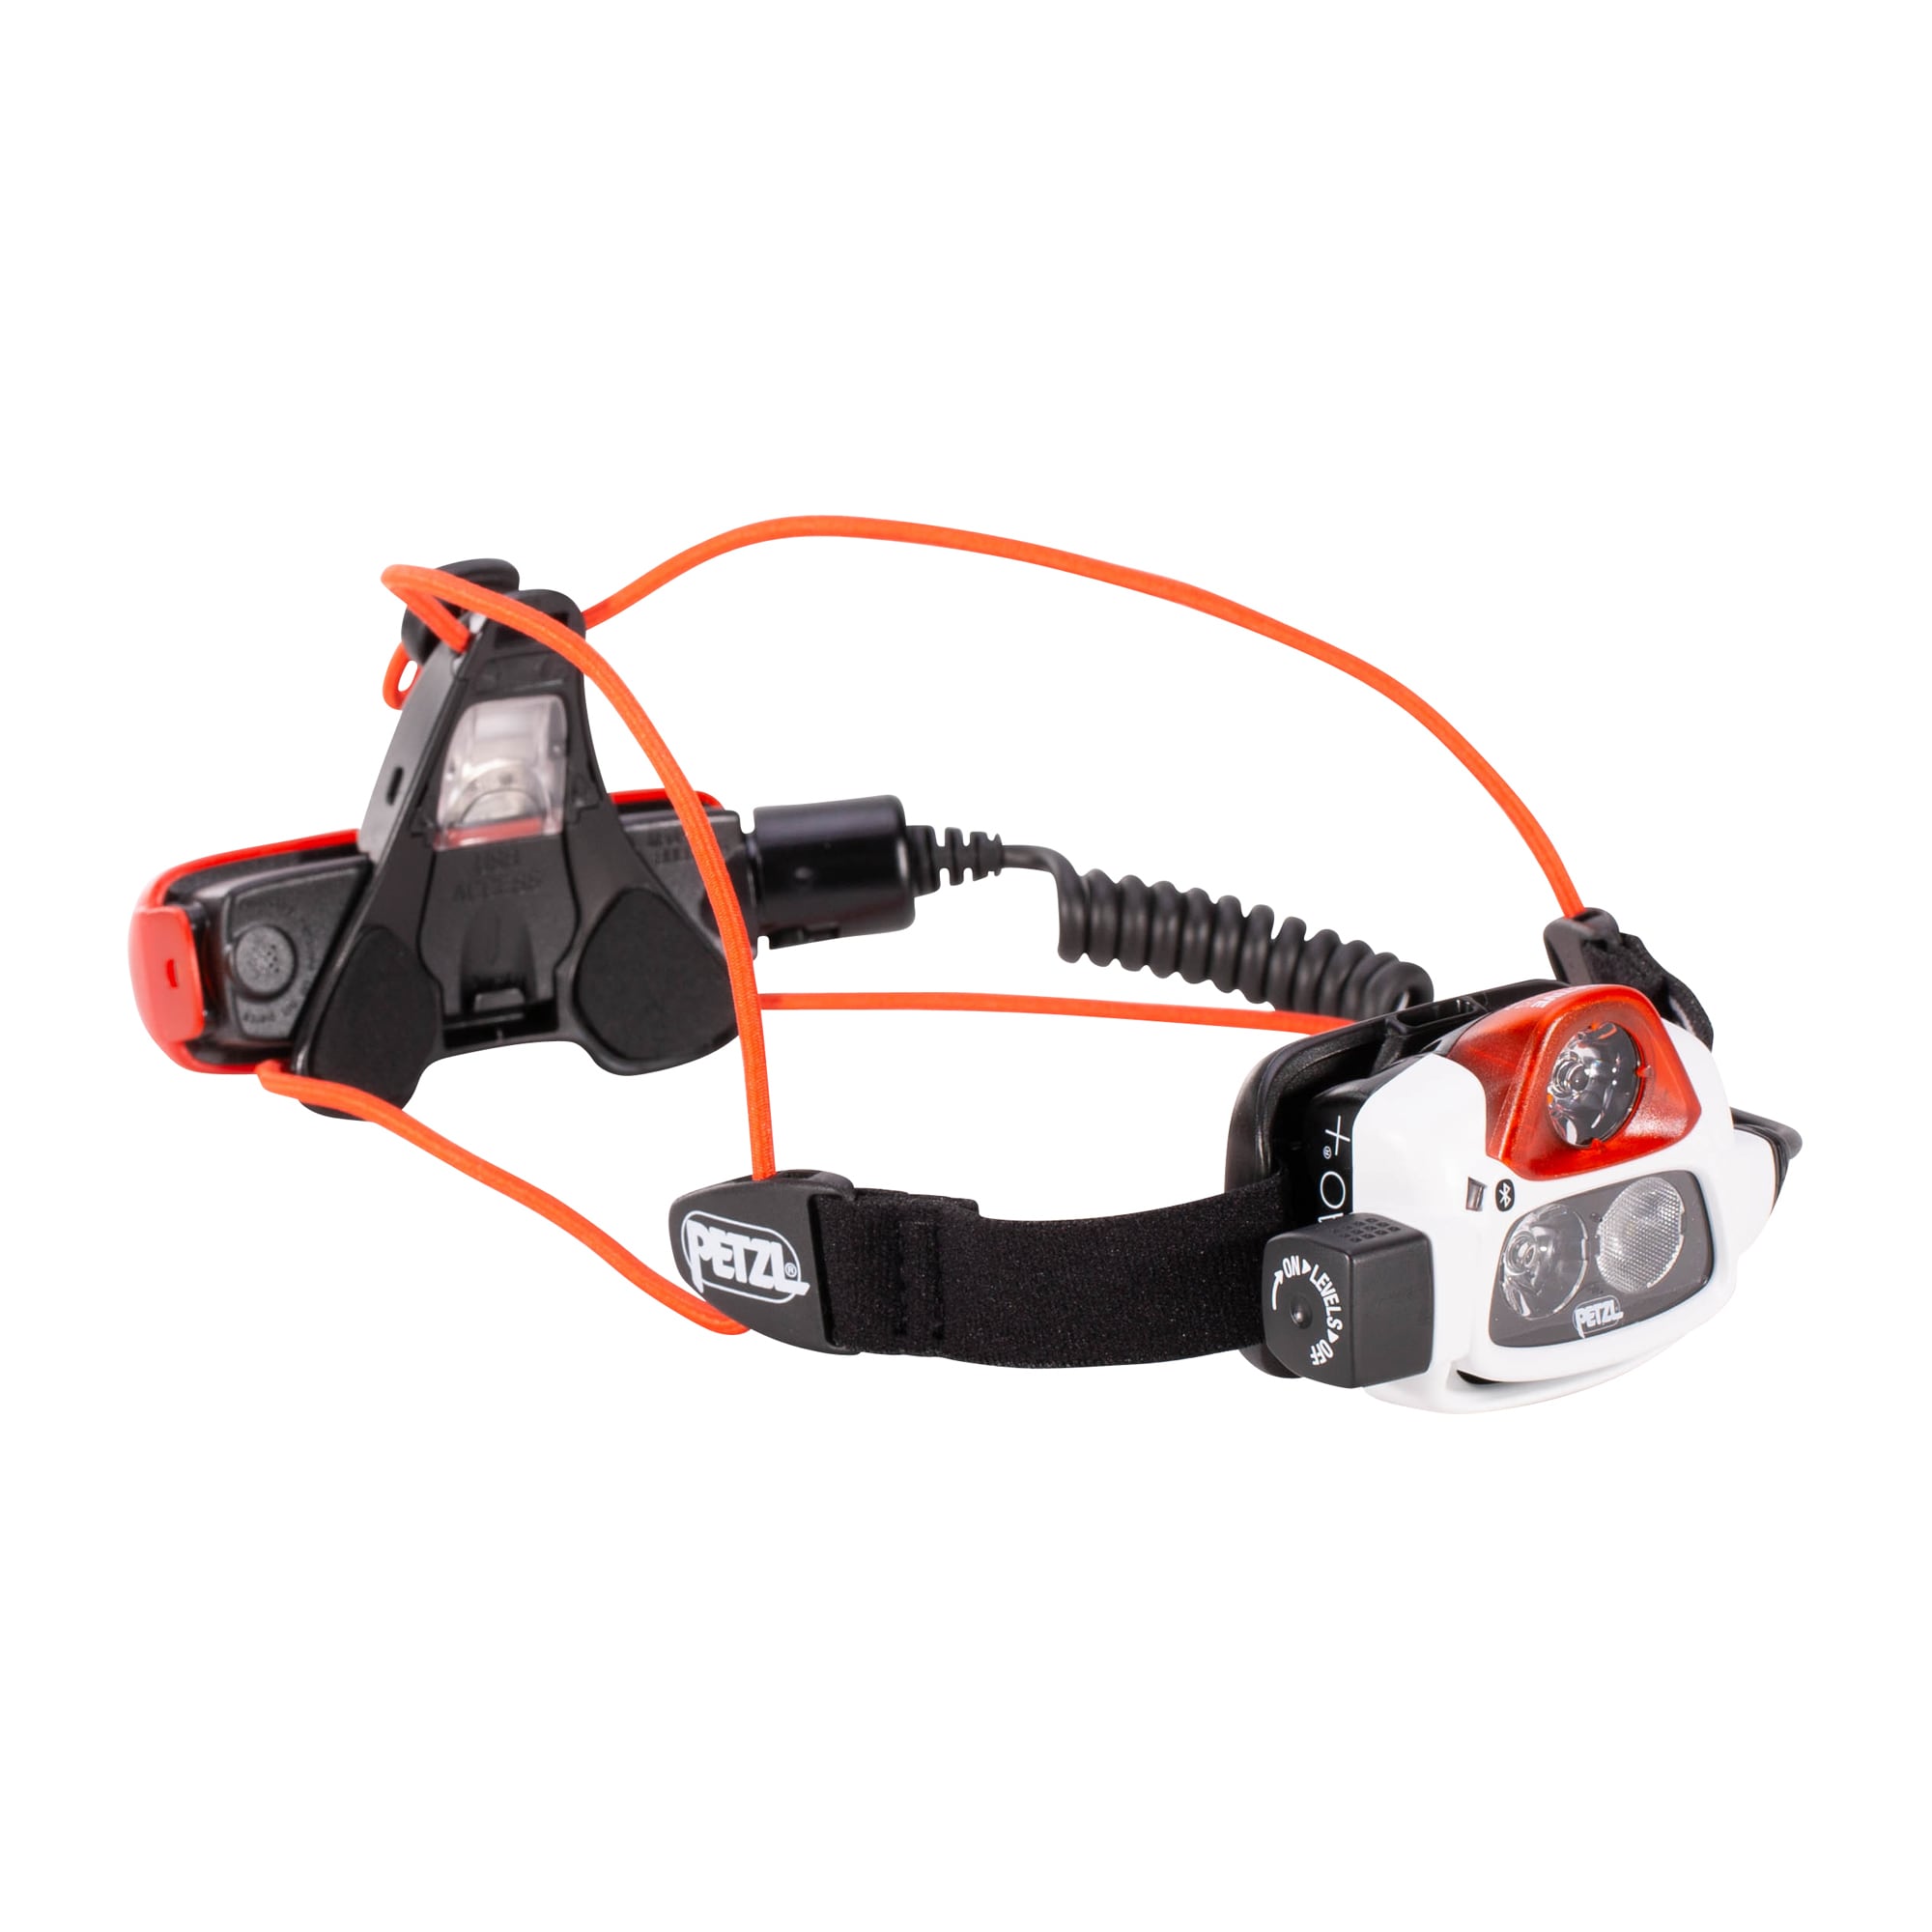 Lampes frontales - Petzl France